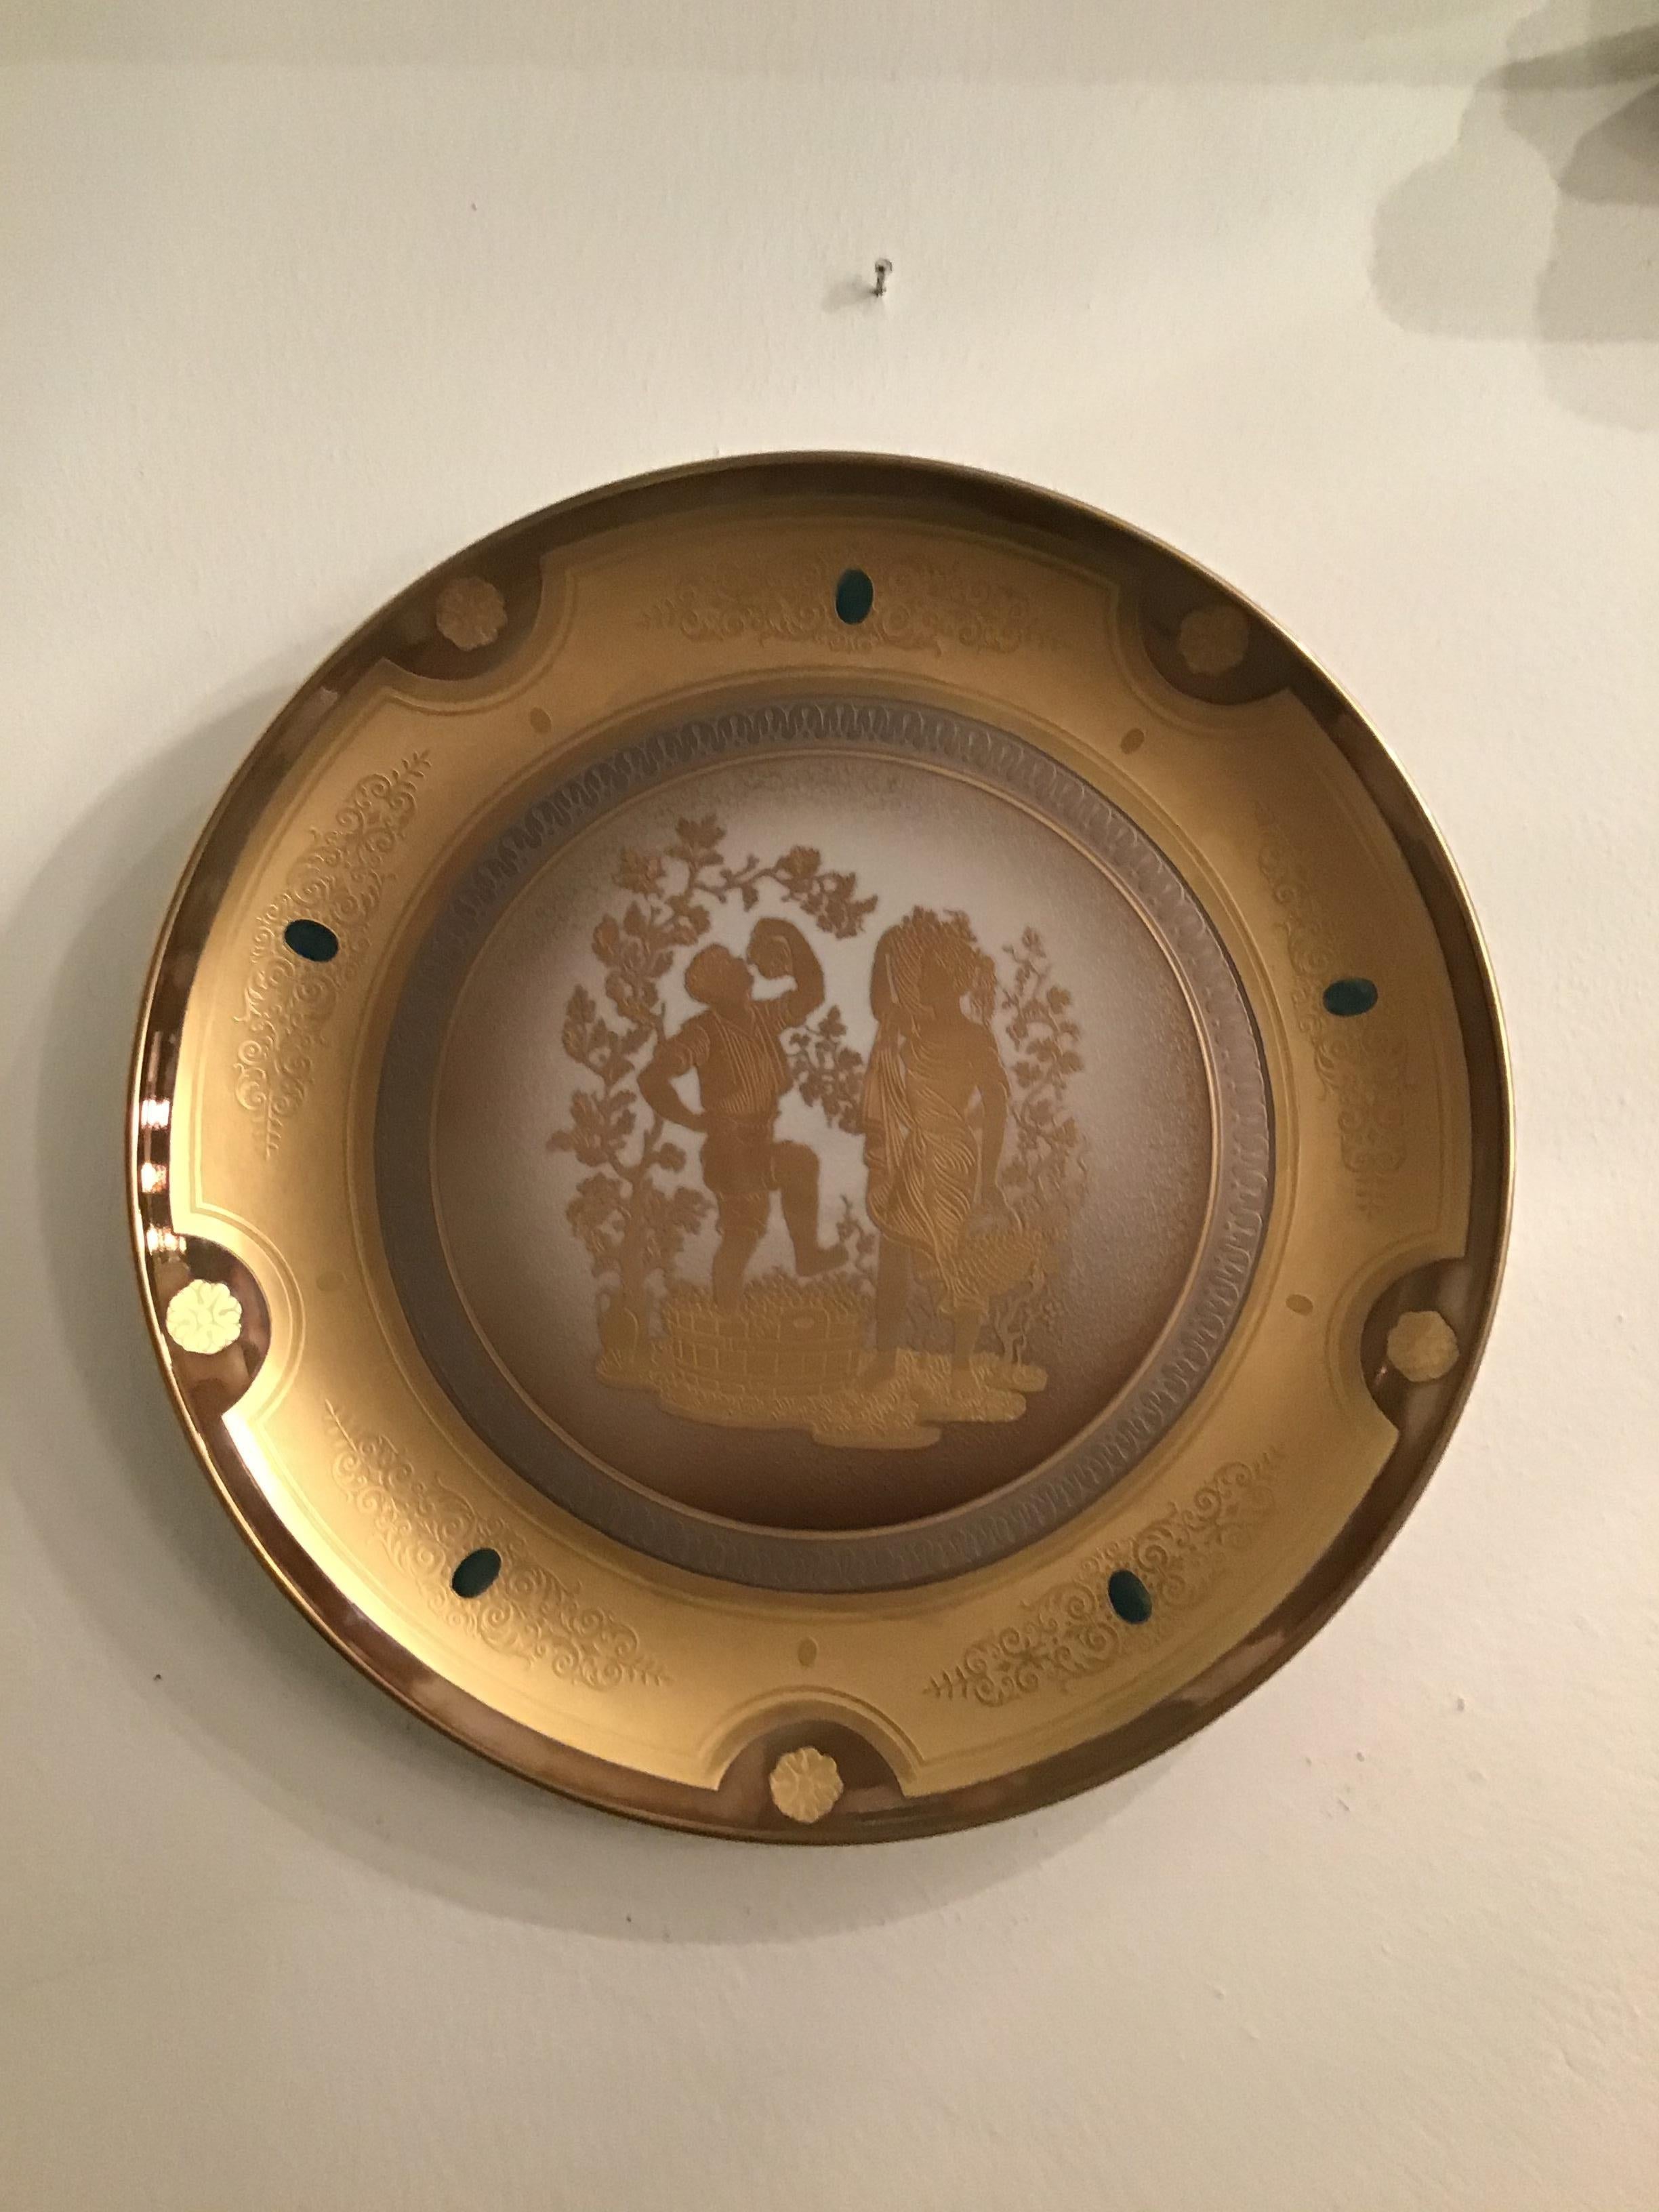 Morbelli Porcelain Wall Plate Gold “ Autunno”, 1960, Italy For Sale 7